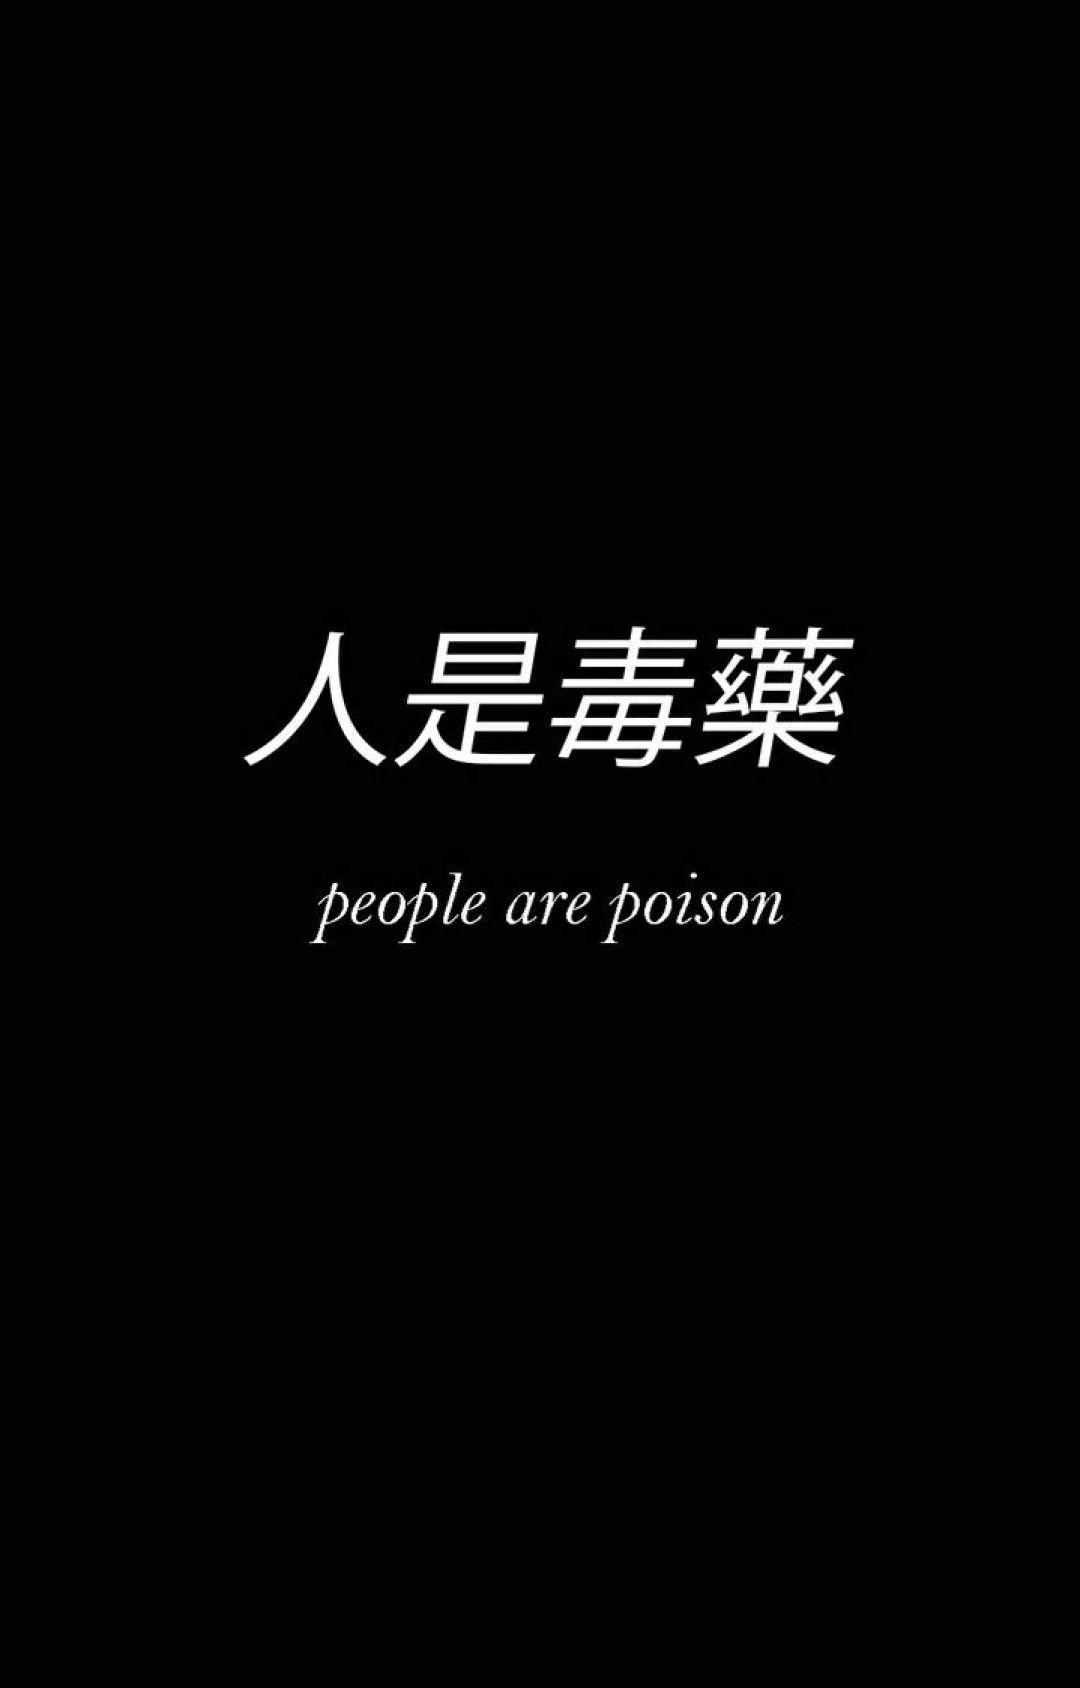 Japanese Aesthetic Quotes, iPhone, Desktop